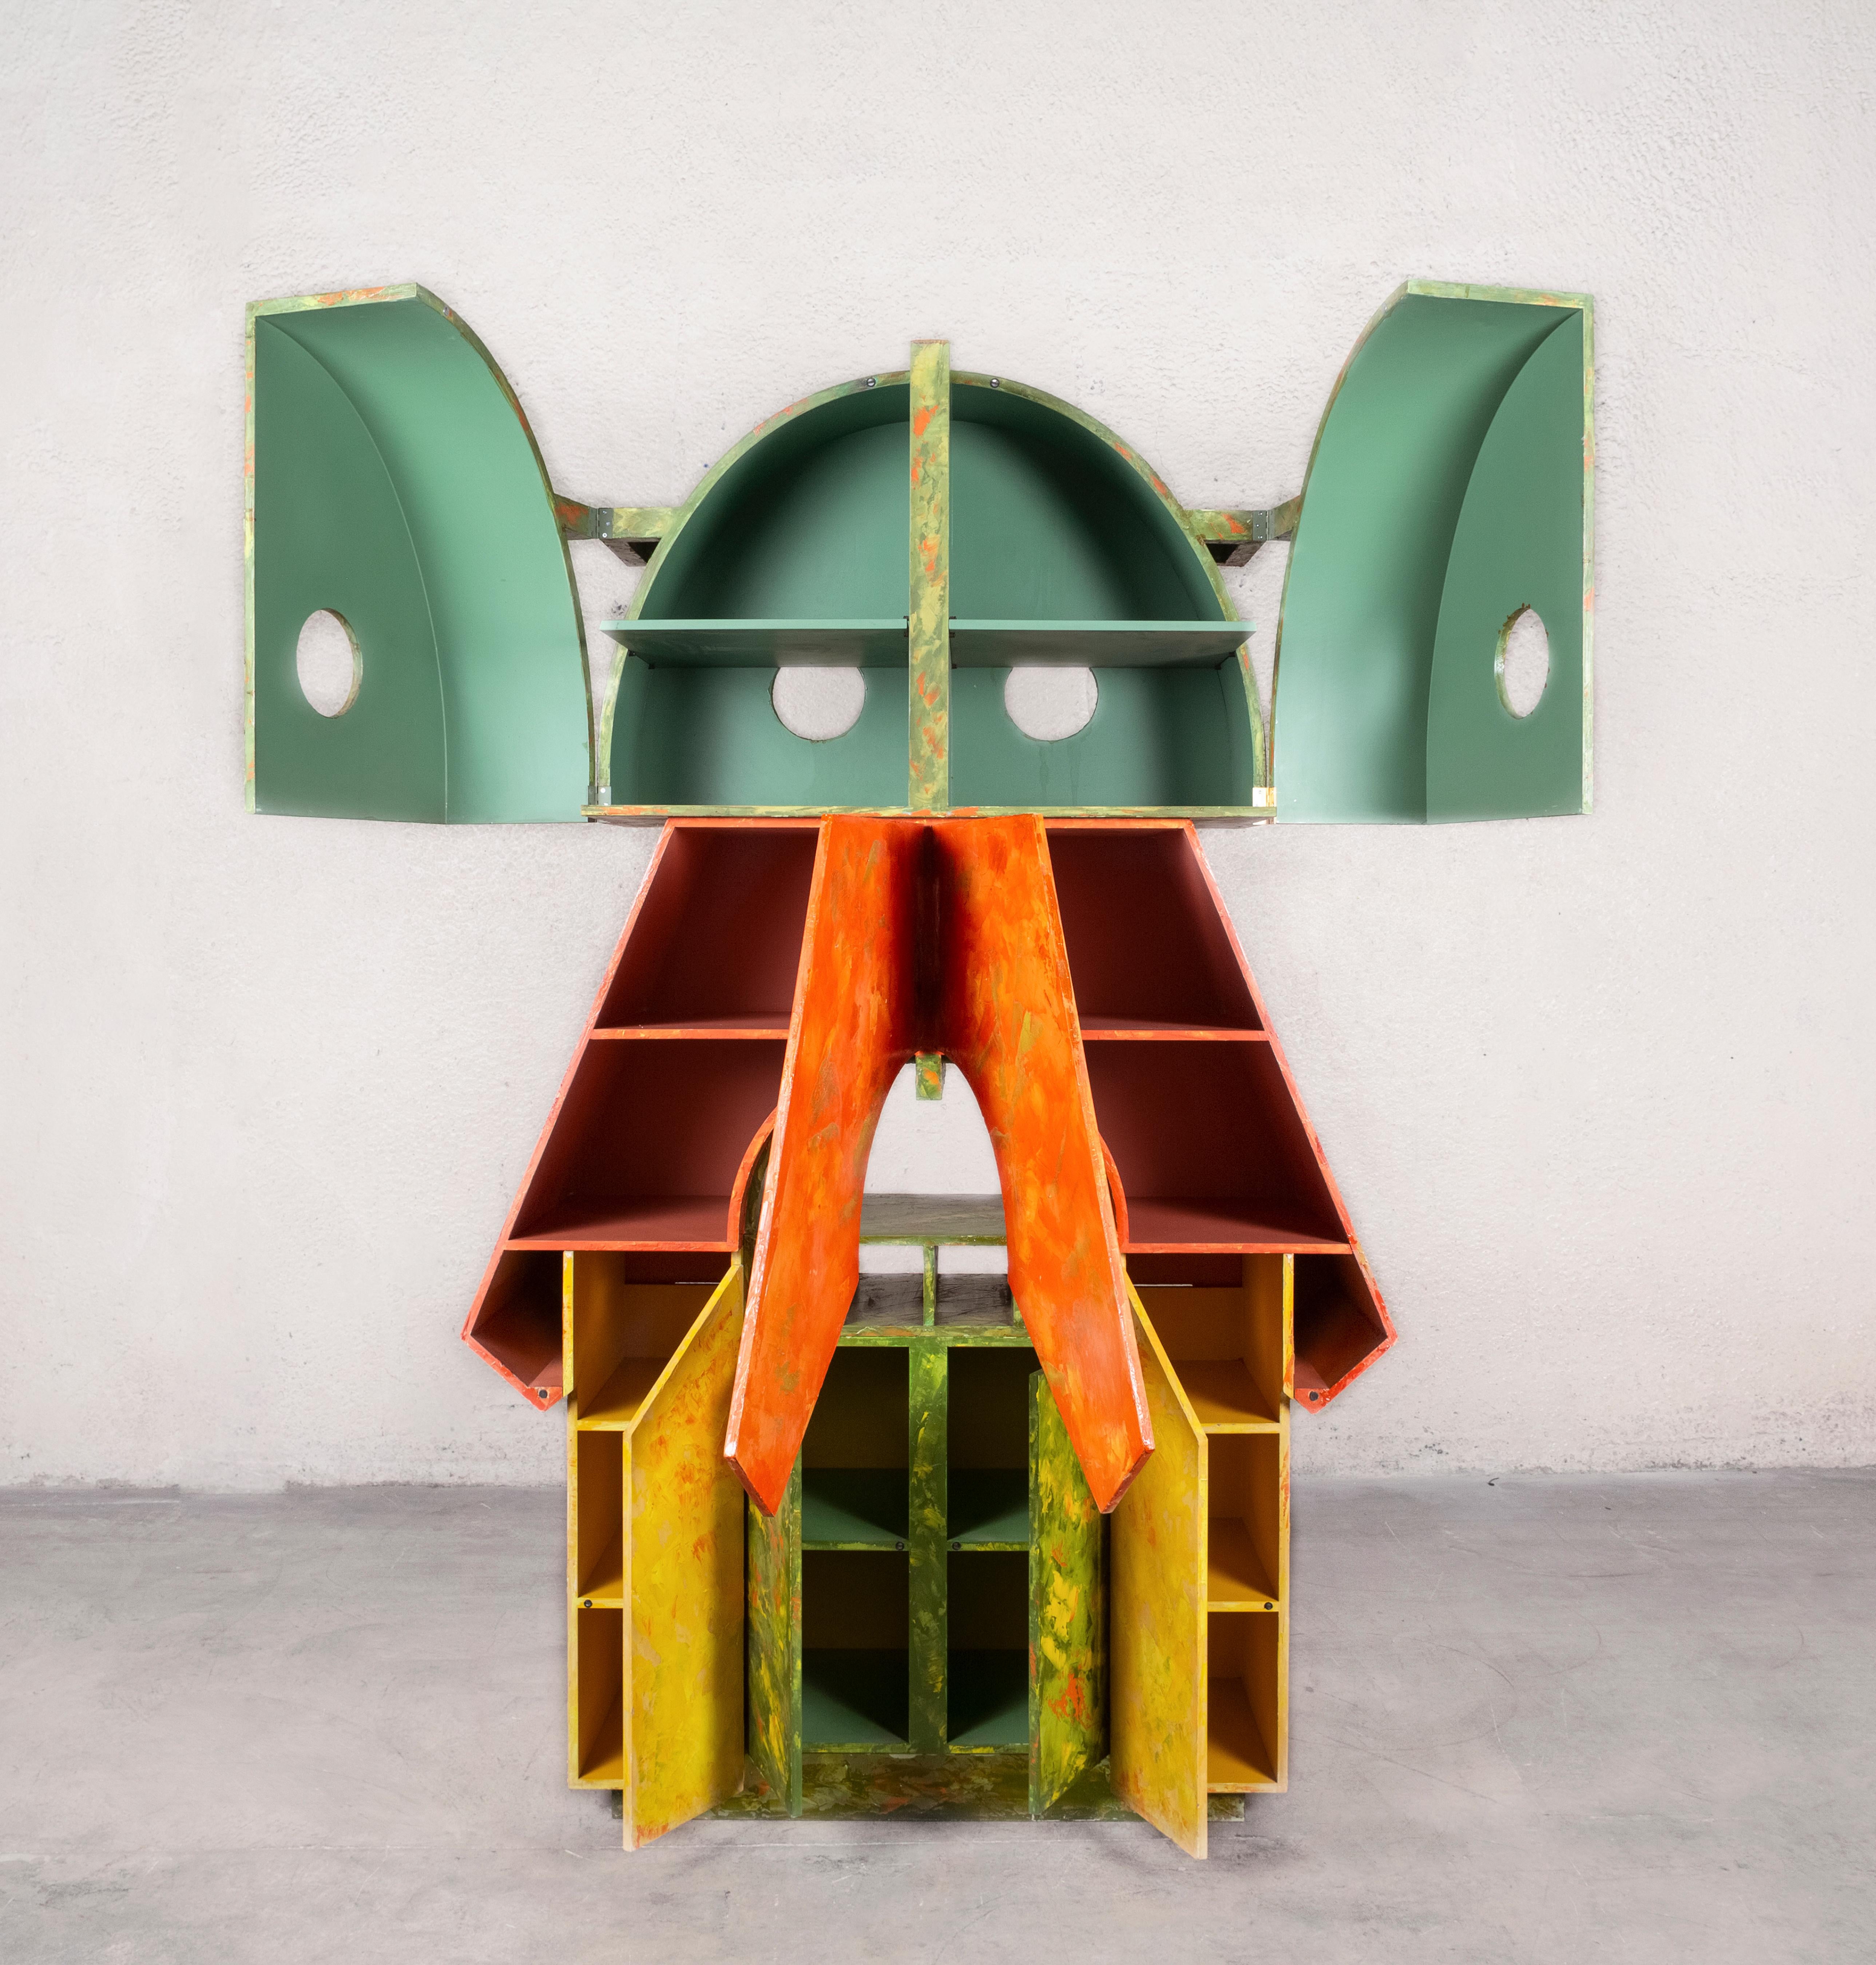 Gaetano Pesce [Italian, b. 1939]
Produced by Cassina
Prototype for Les Ateliers, 1986-1987
Wood, polychrome epoxy, resin and shellac
Measures: 93 x 56.75 x 22.75 inches
236 x 144 x 58 cm

Born in 1939 in La Spezia, Italy, Gaetano Pesce